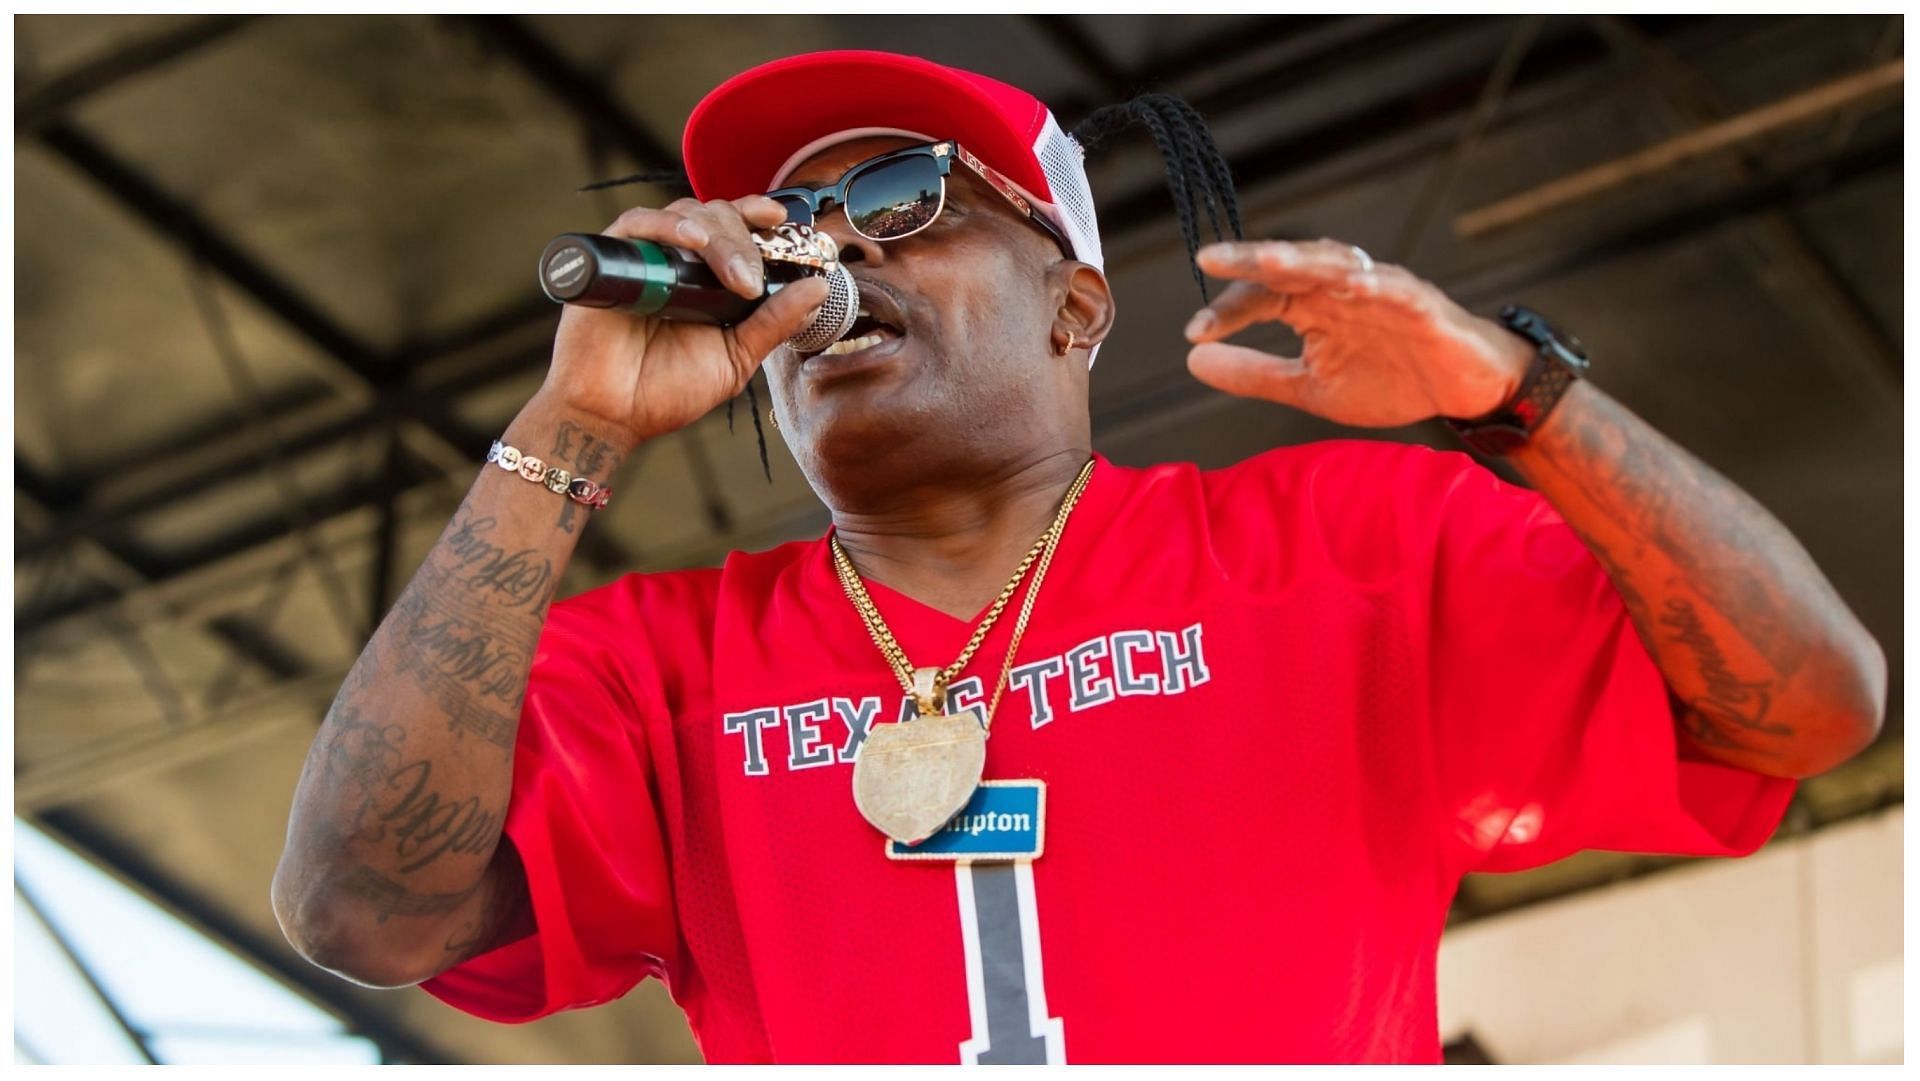 Coolio was a rapper, record producer and actor (Image via John E. Moore III/Getty Images)